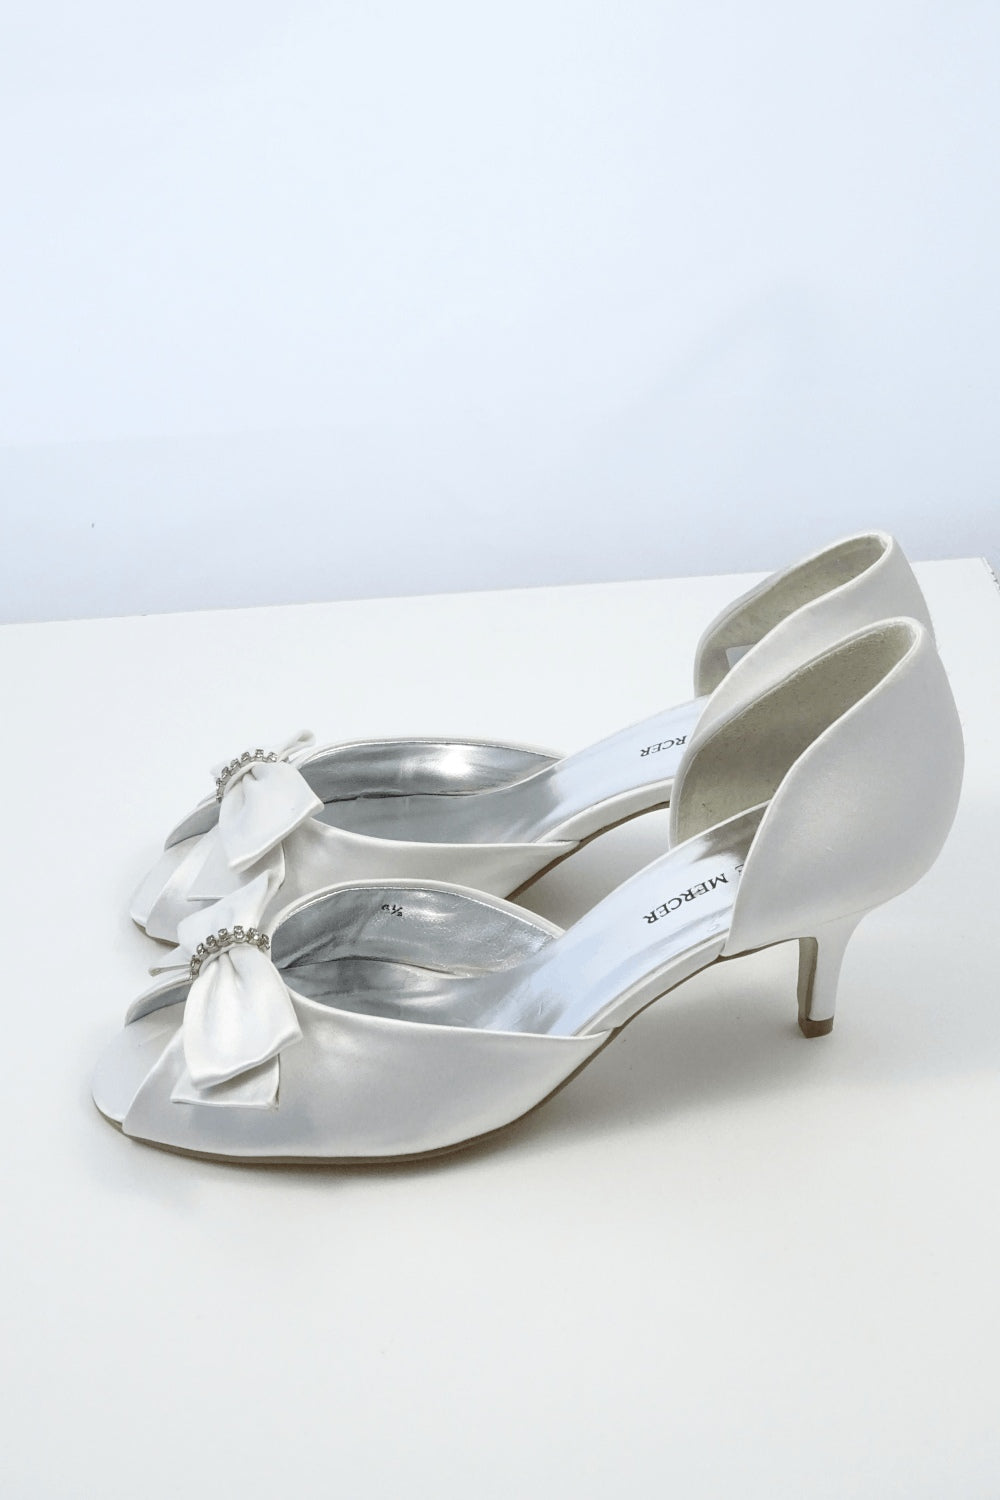 Joanne Mercer white peep toe heels with bow and jewel detailing on toes.